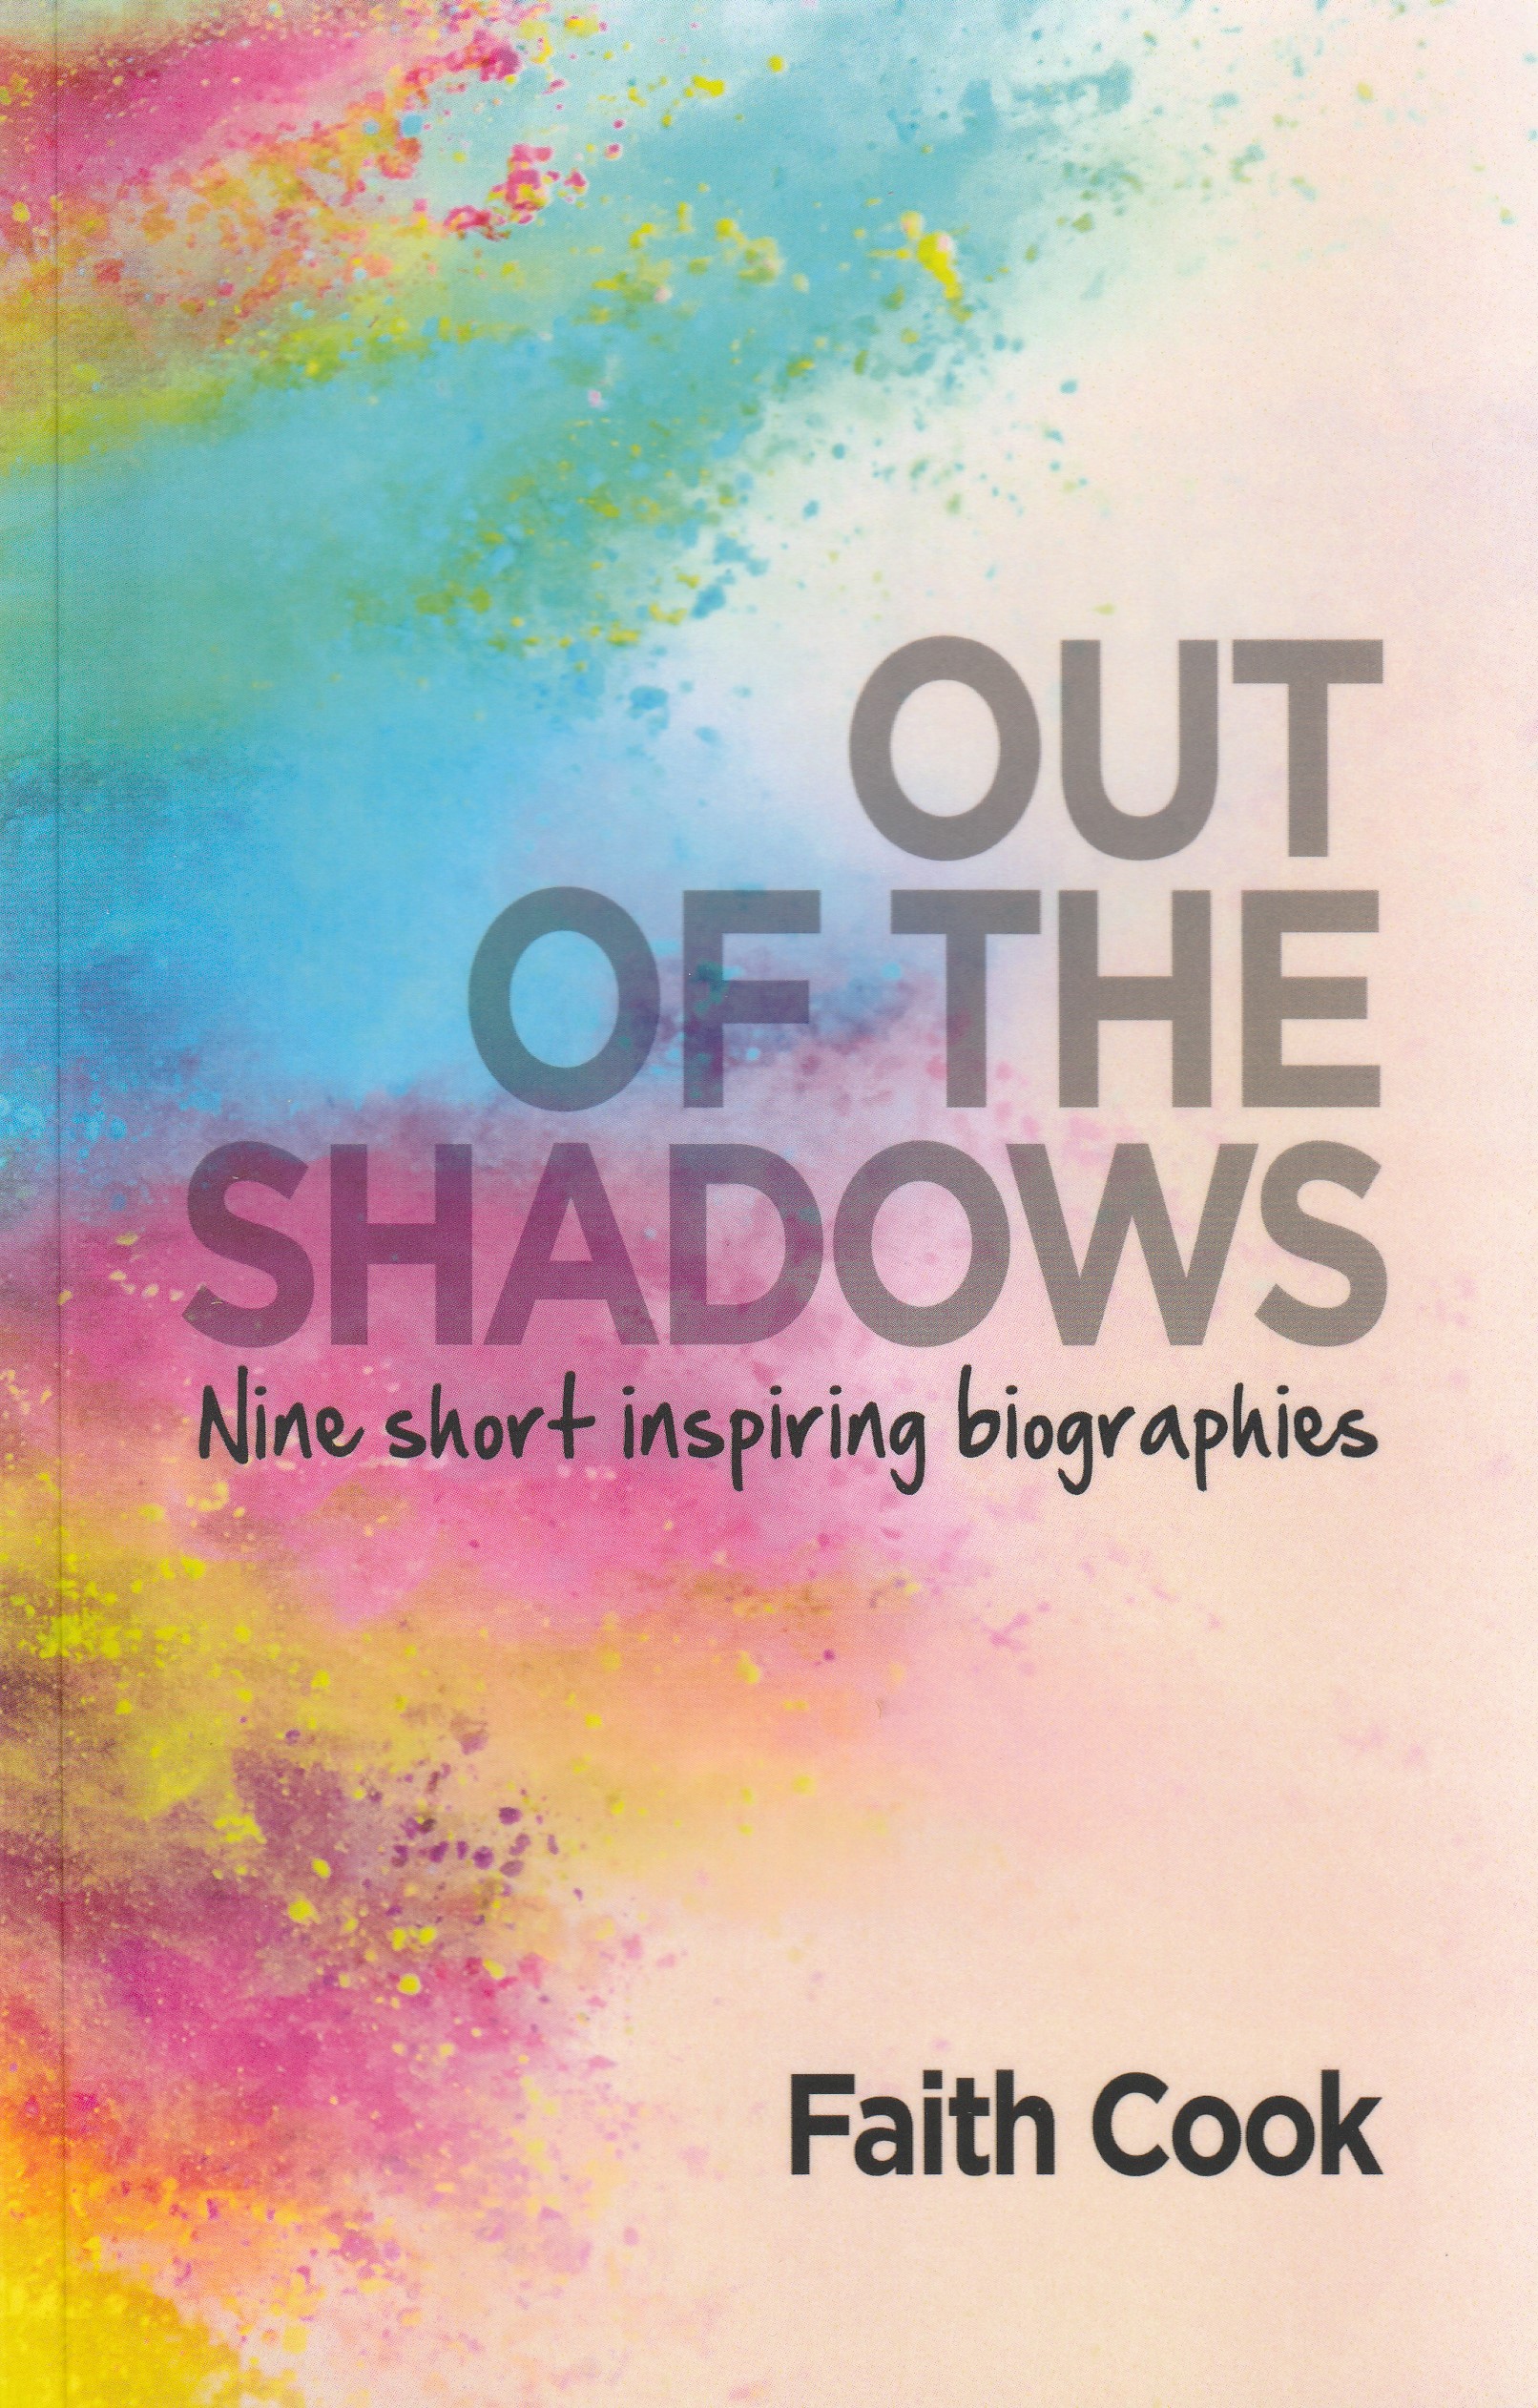 Out of the Shadows: Nine Short Inspiring Biographies